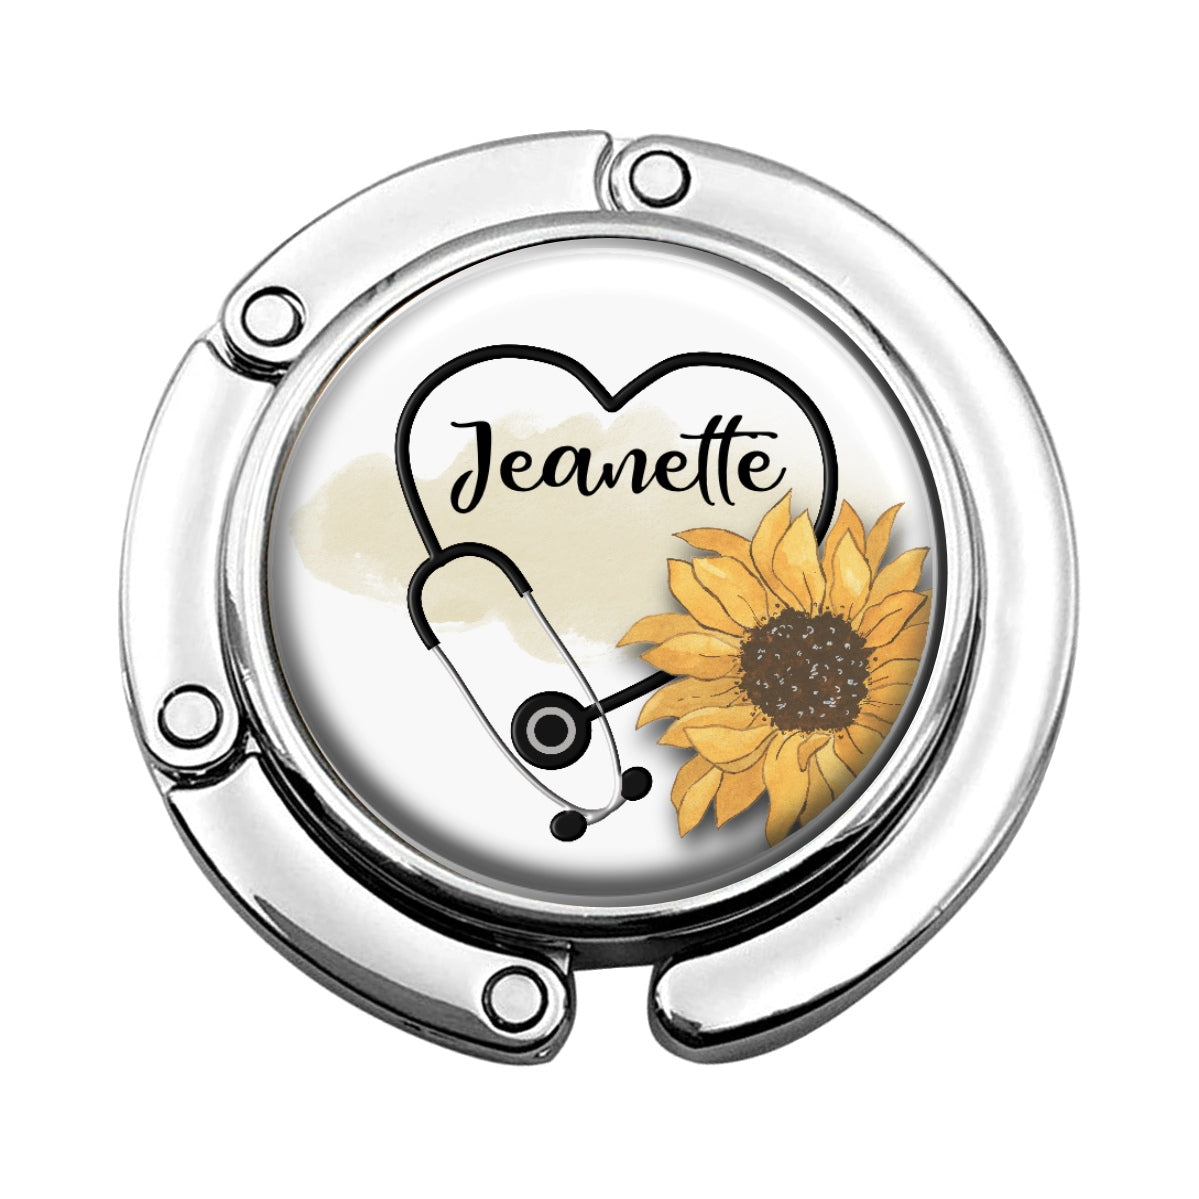 a badge with a stethoscope and a sunflower